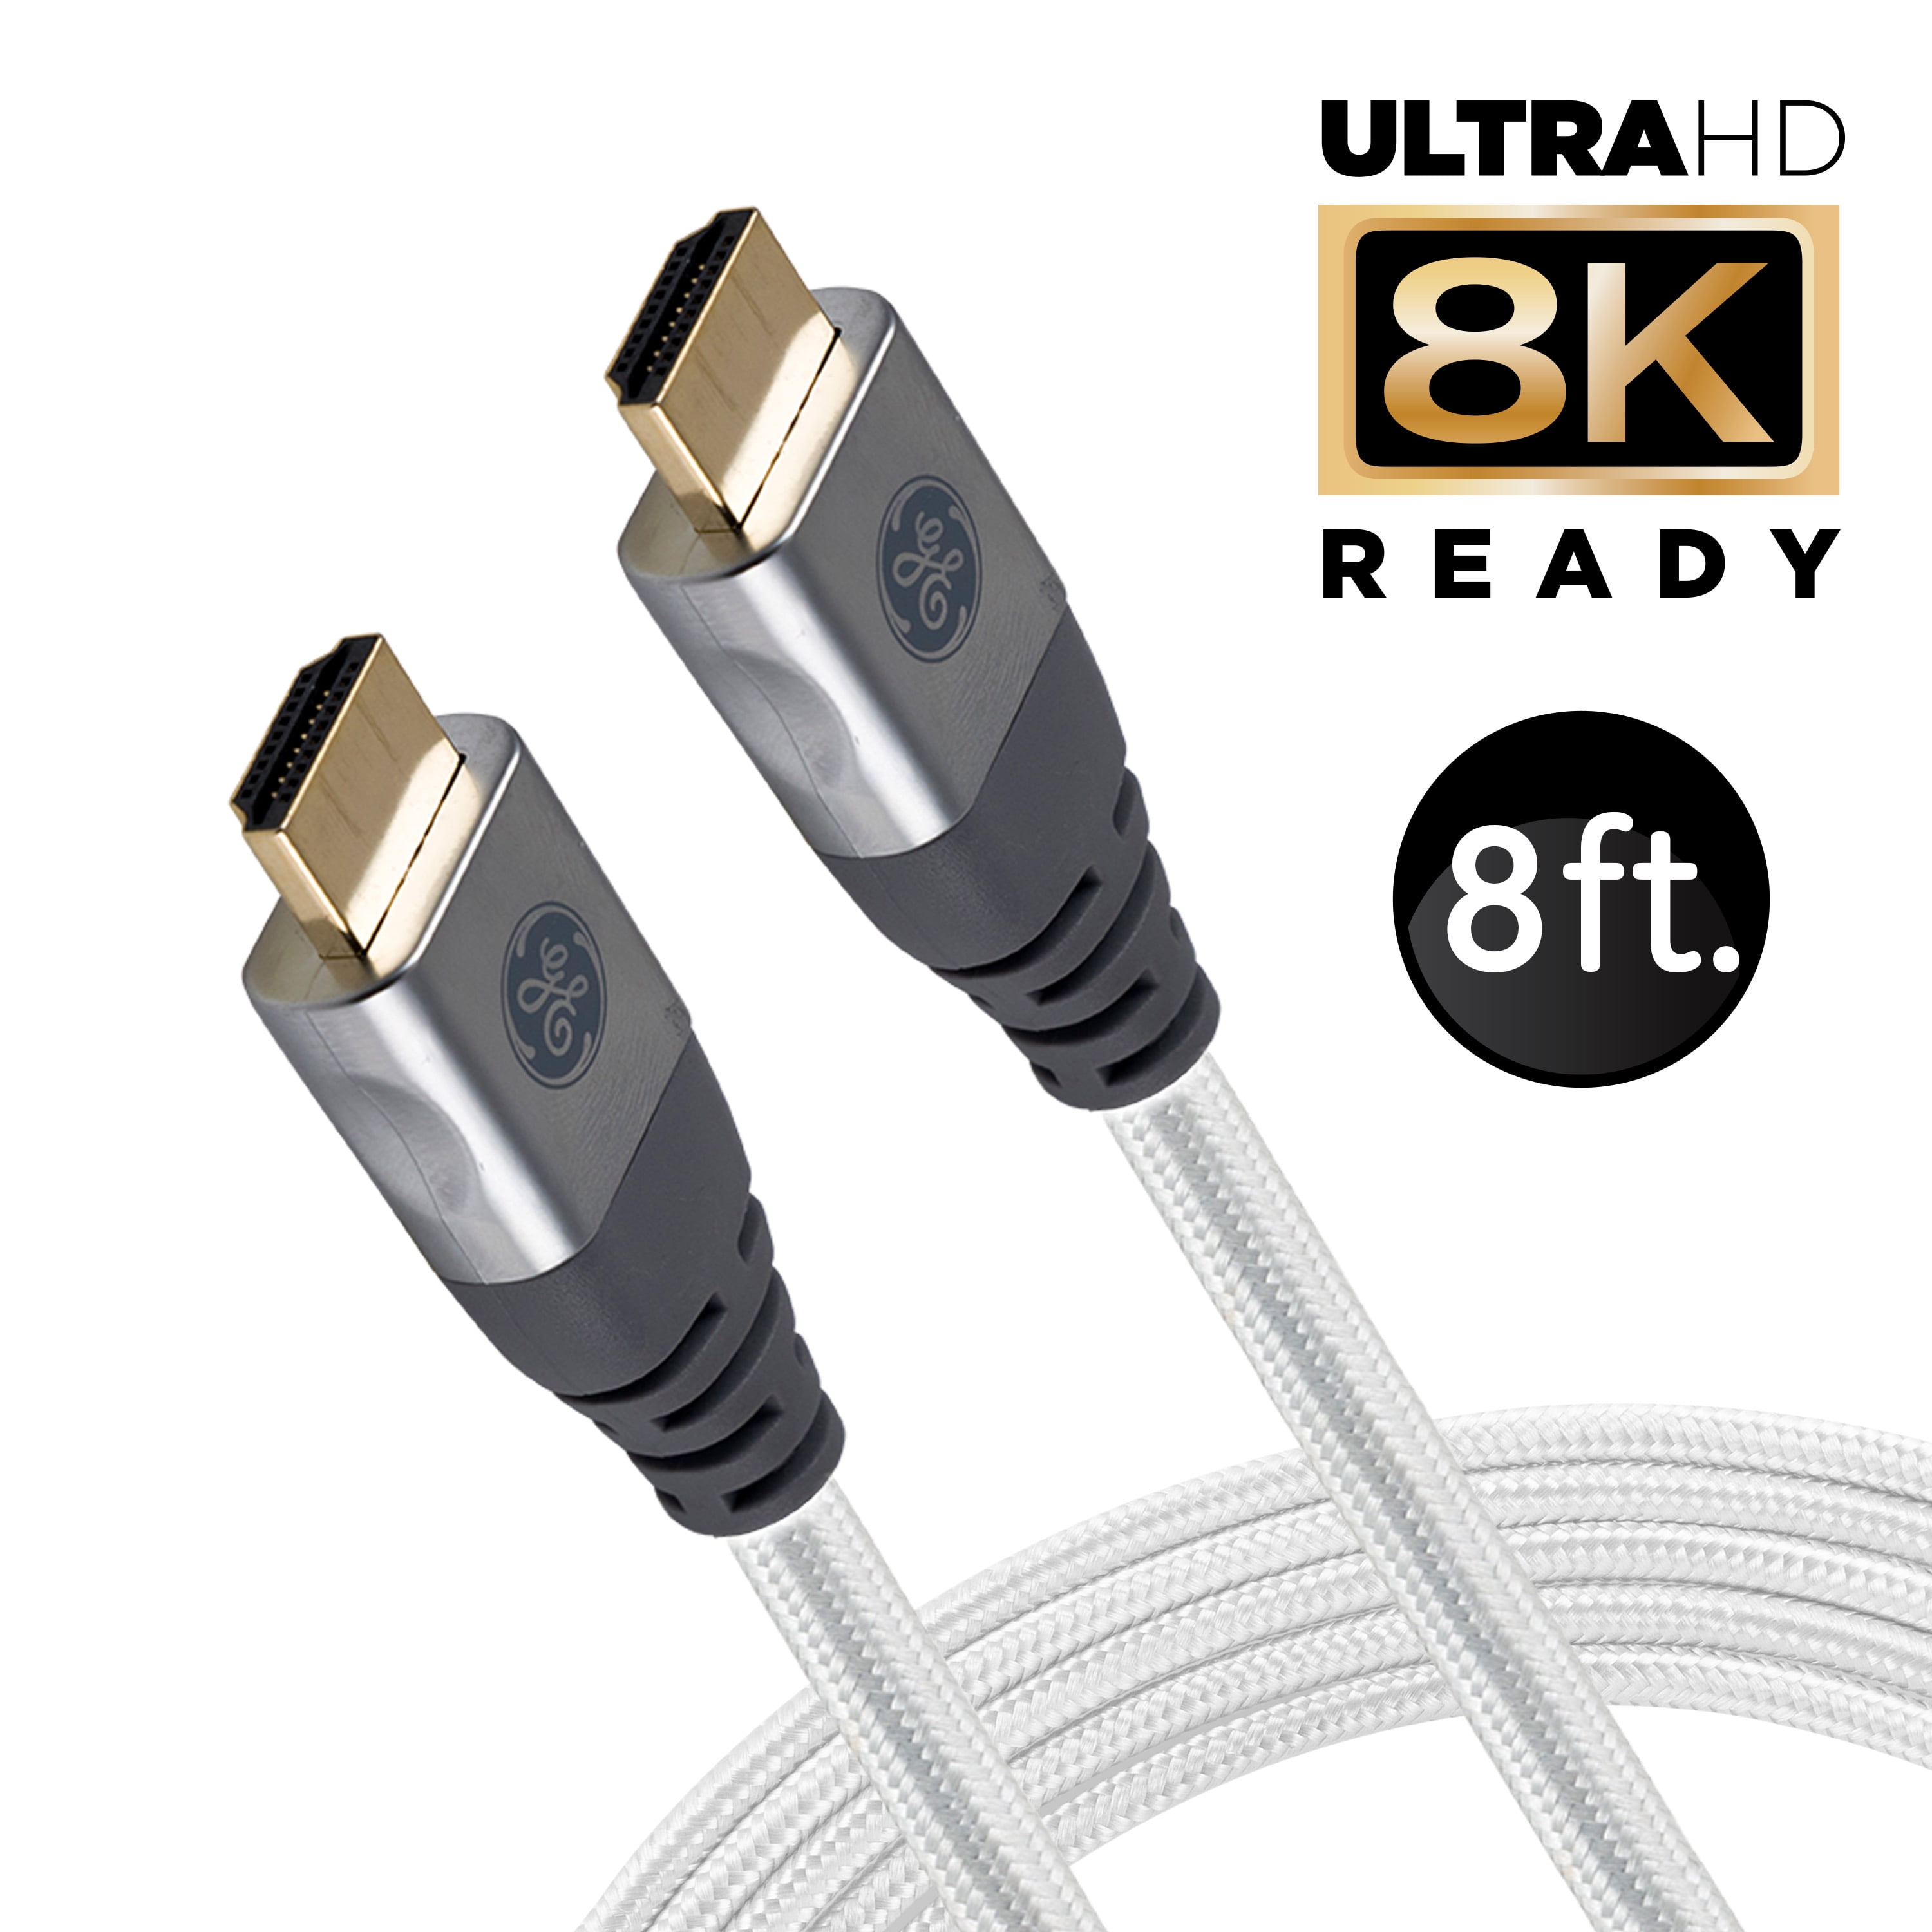 10ft (3m) HDMI Cable - 4K High Speed HDMI Cable with Ethernet - UHD 4K 30Hz  Video - HDMI 1.4 Cable - Ultra HD HDMI Monitors, Projectors, TVs 